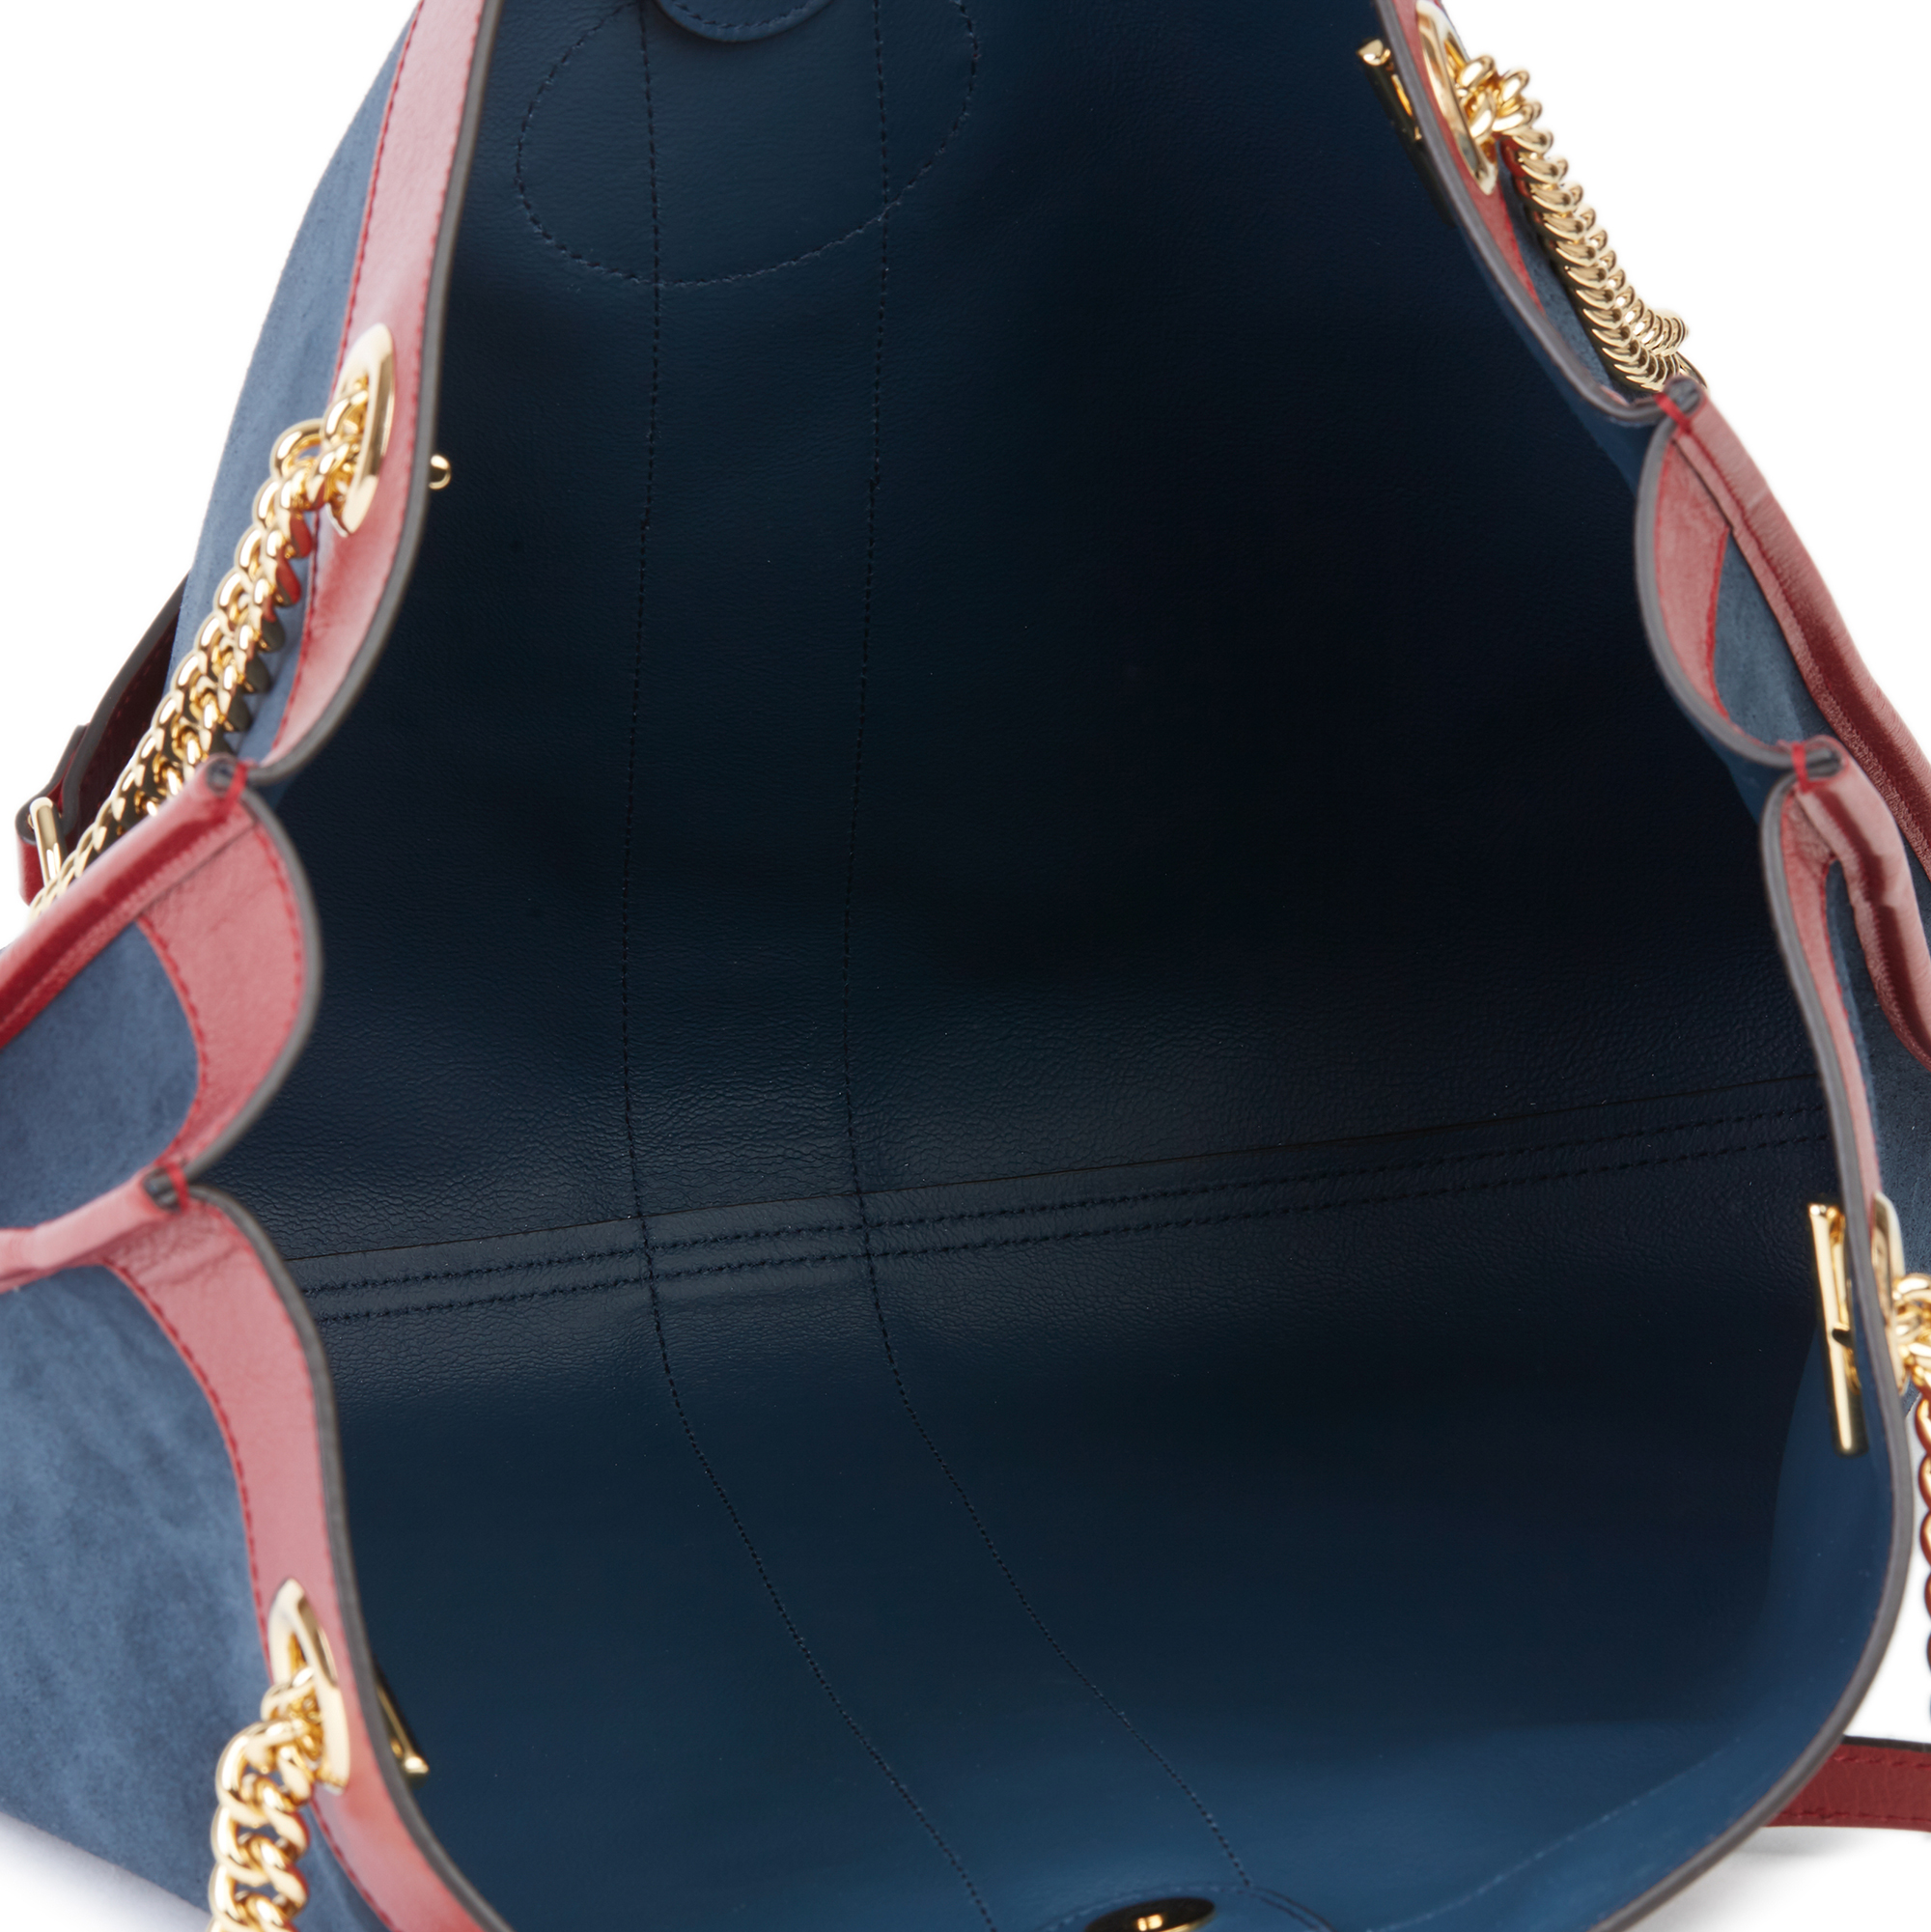 Gucci Red Aged Calfskin Leather & Blue Suede Web Large Rajah Tote - Image 4 of 12